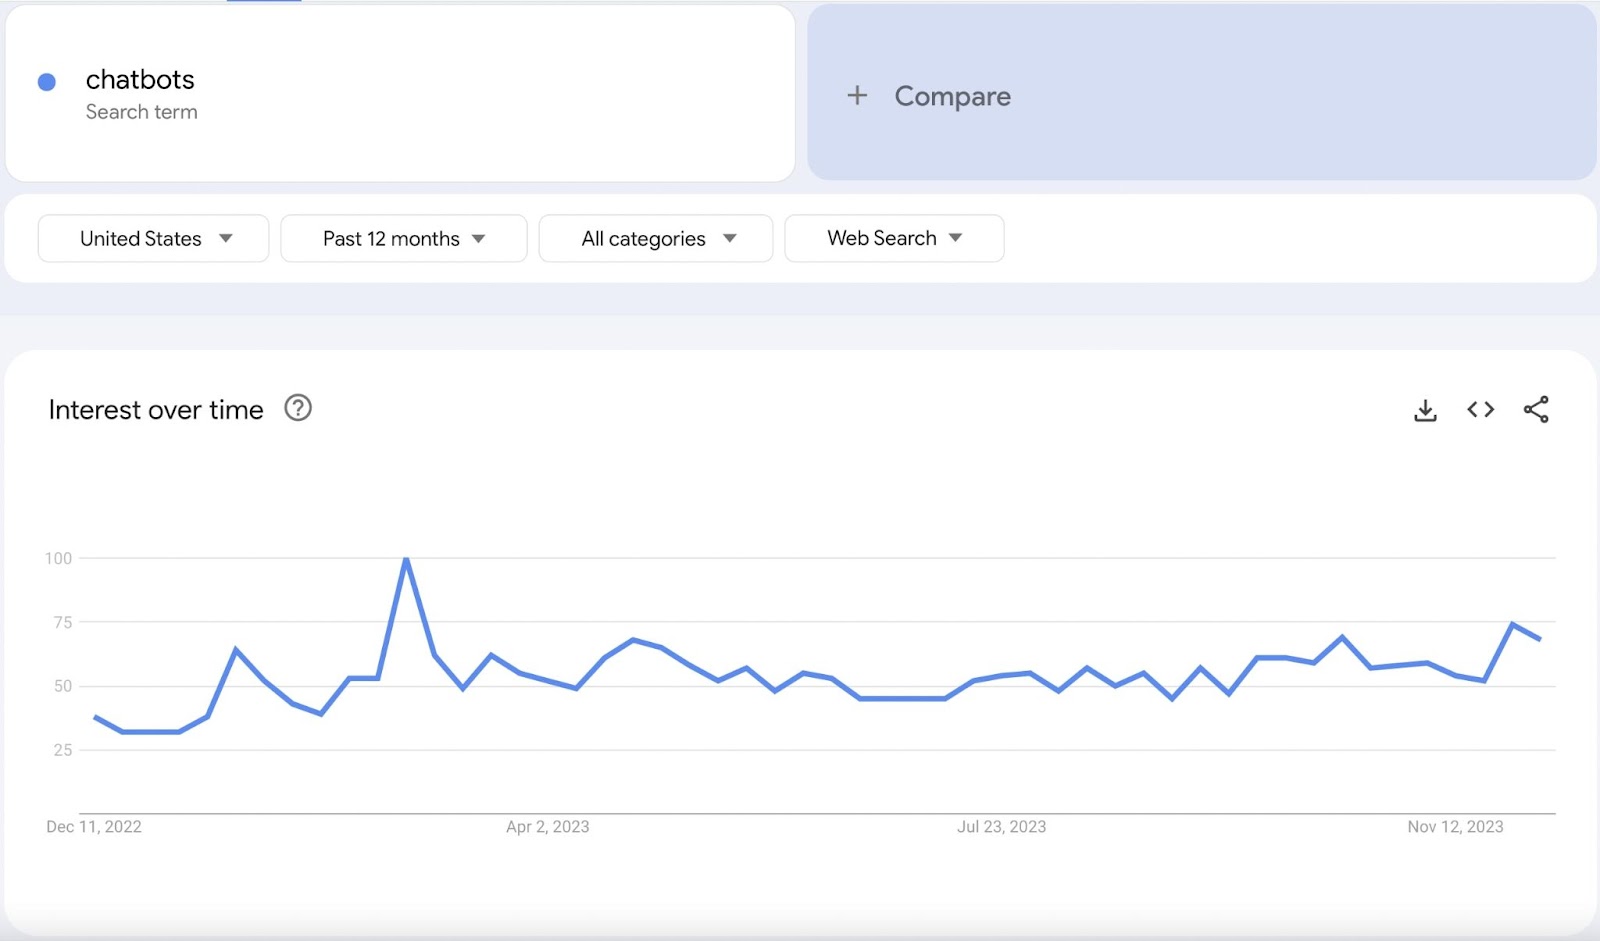 Google Trends graph for "chatbots"